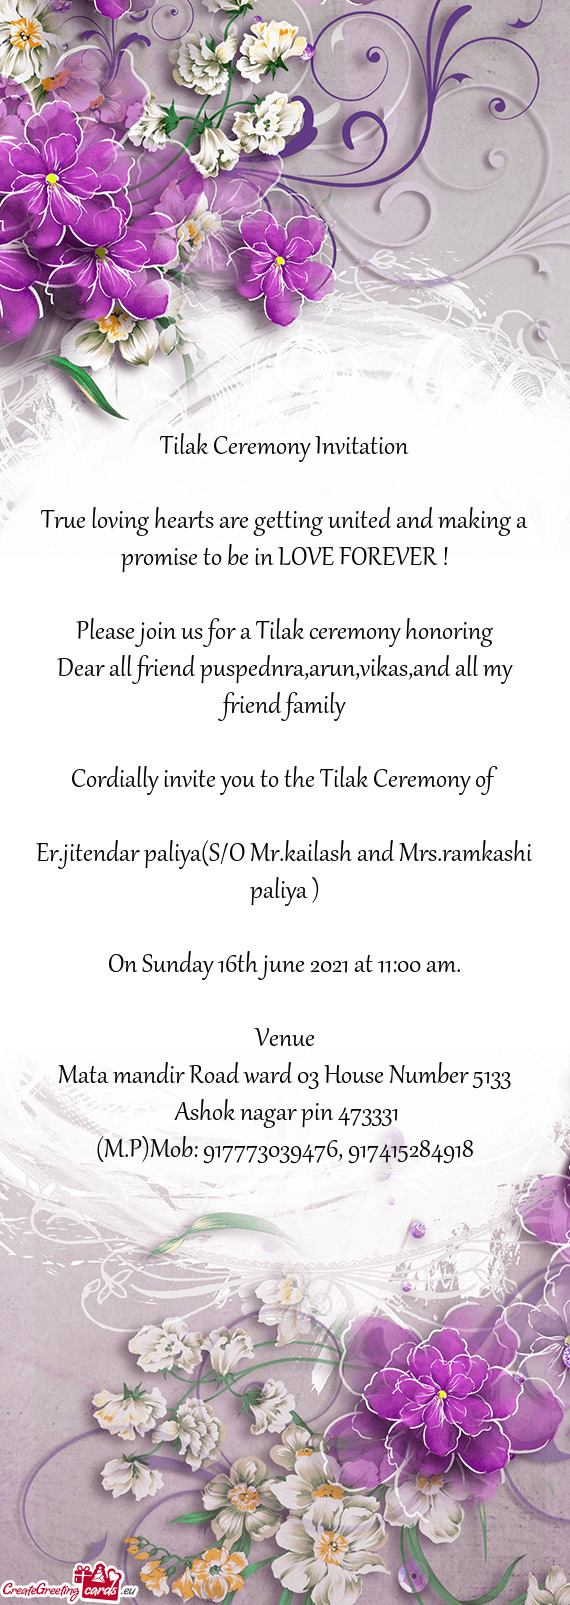 Cordially invite you to the Tilak Ceremony of